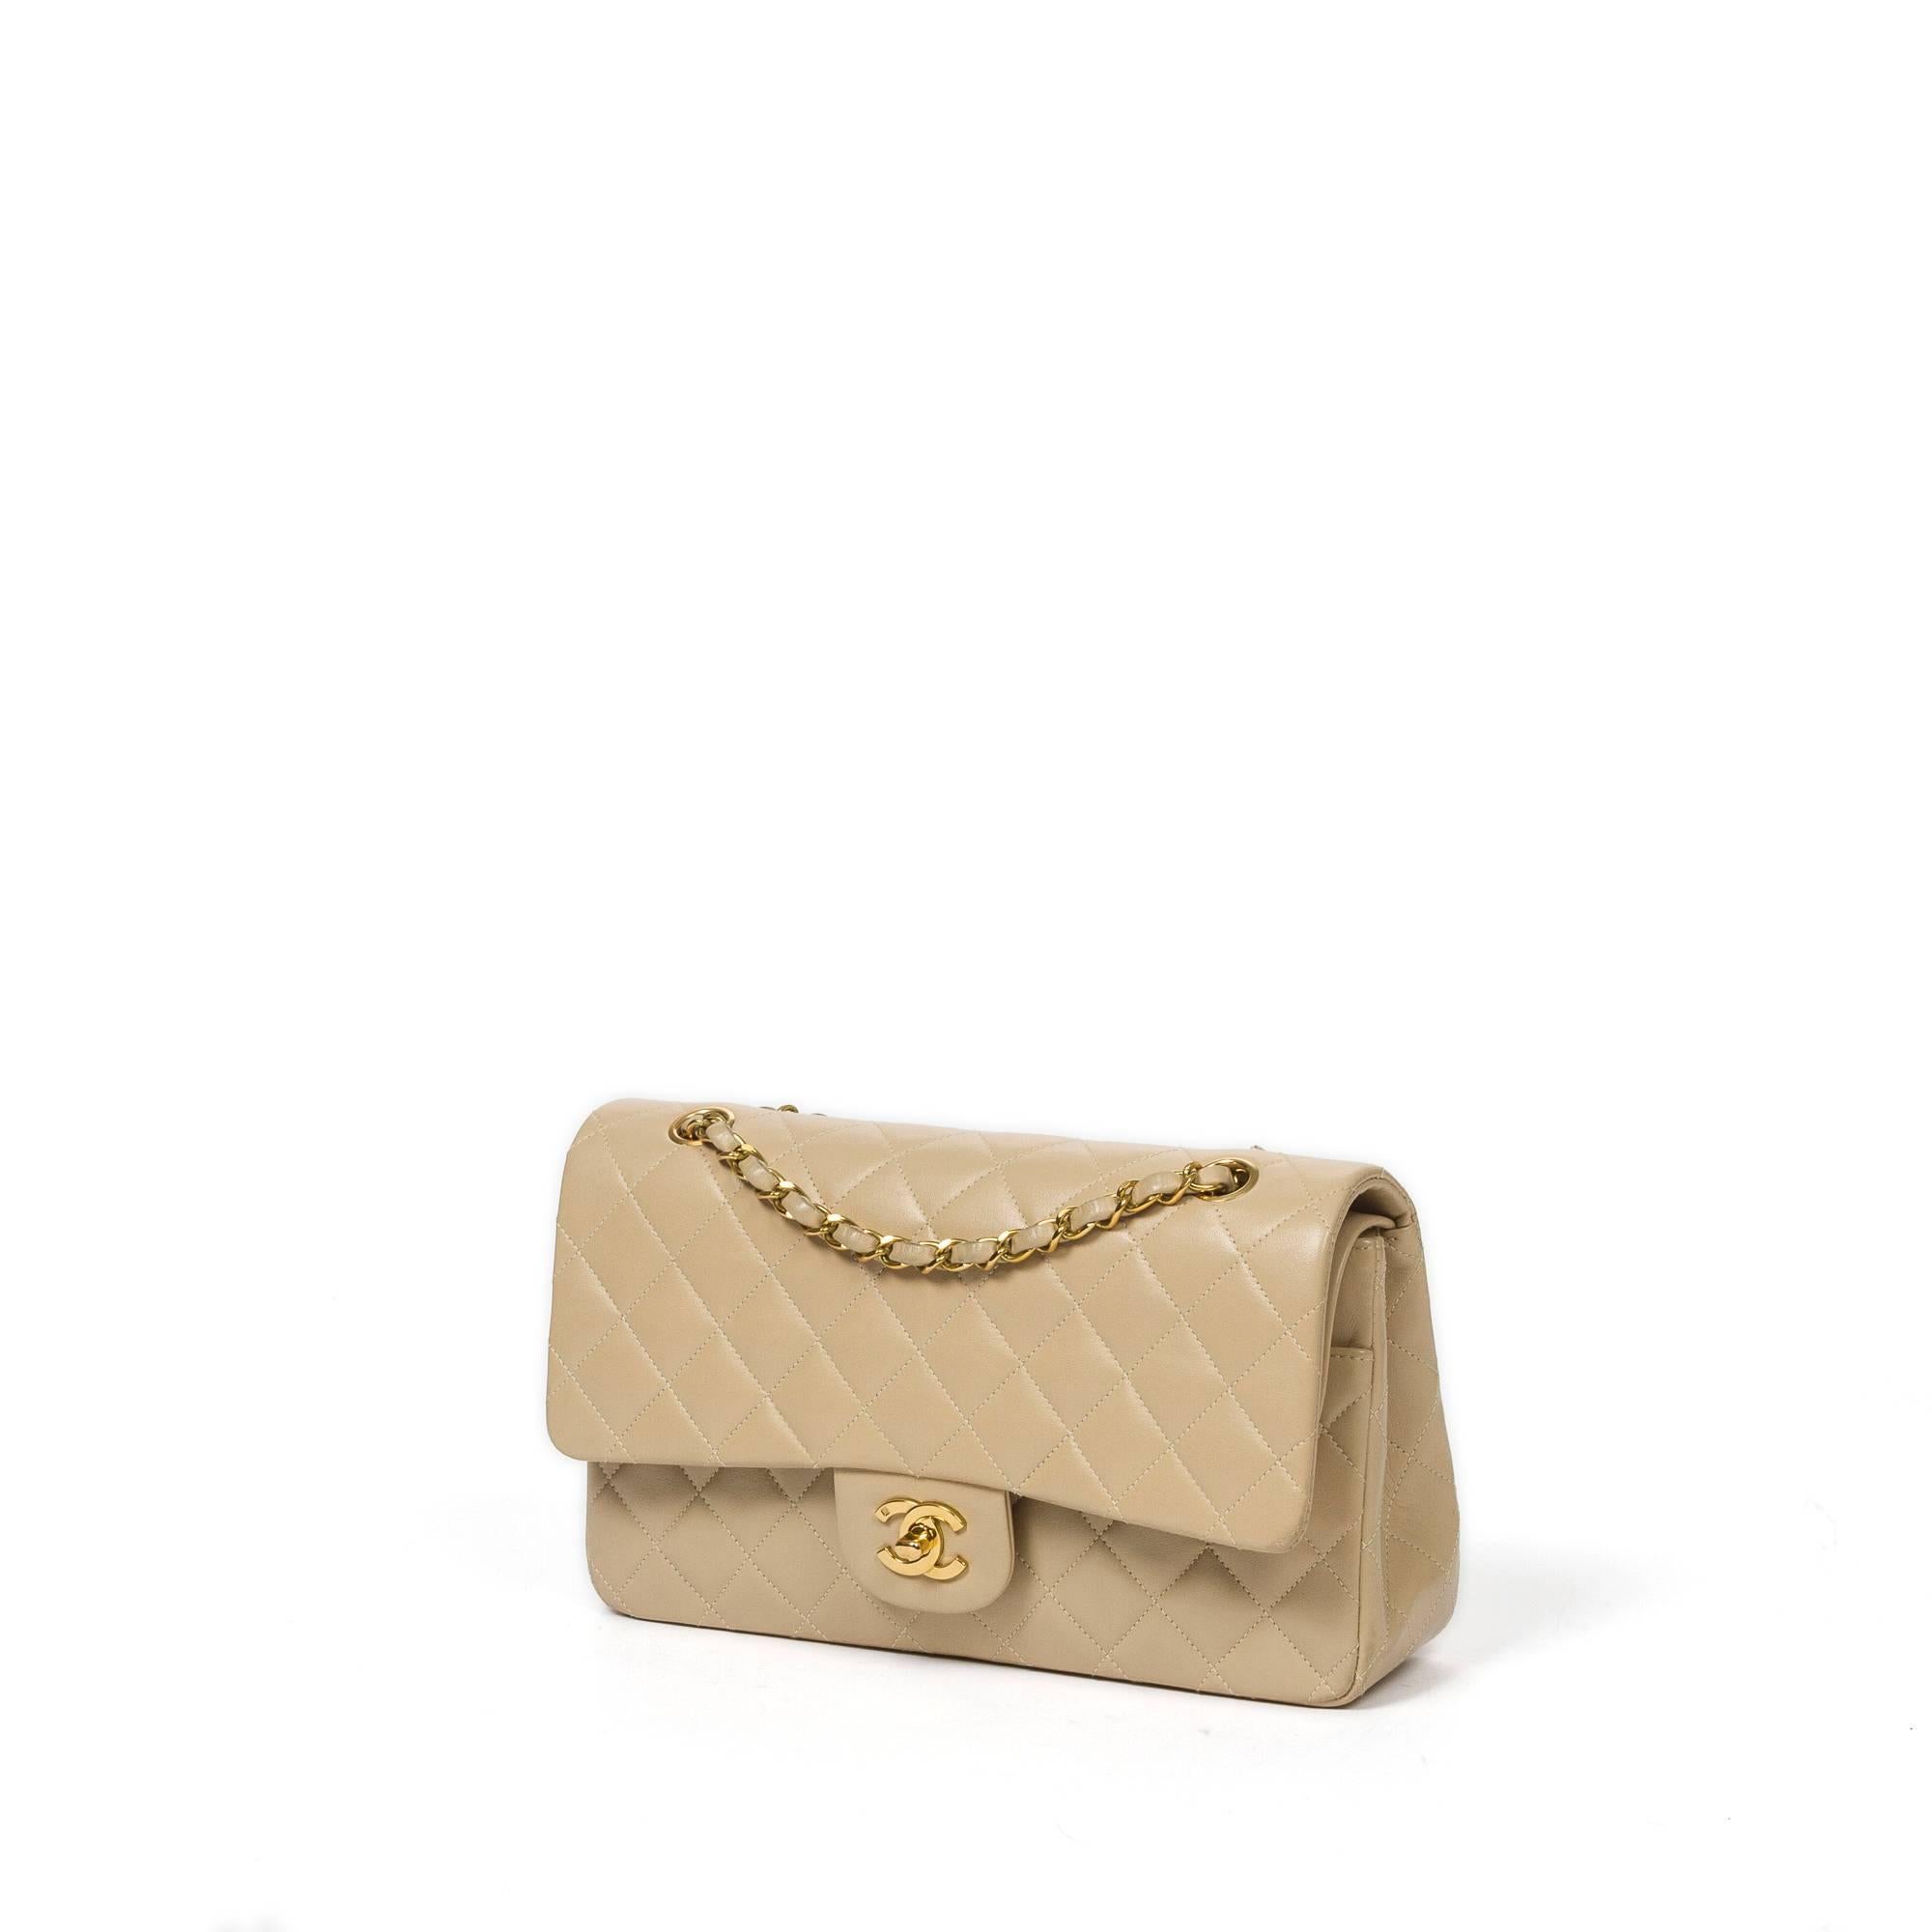 Chanel Classic Double Flap 26cm in beige quilted leather, double chain strap interlaced with beige leather  (drop: Single:40cm, double:22cm), 